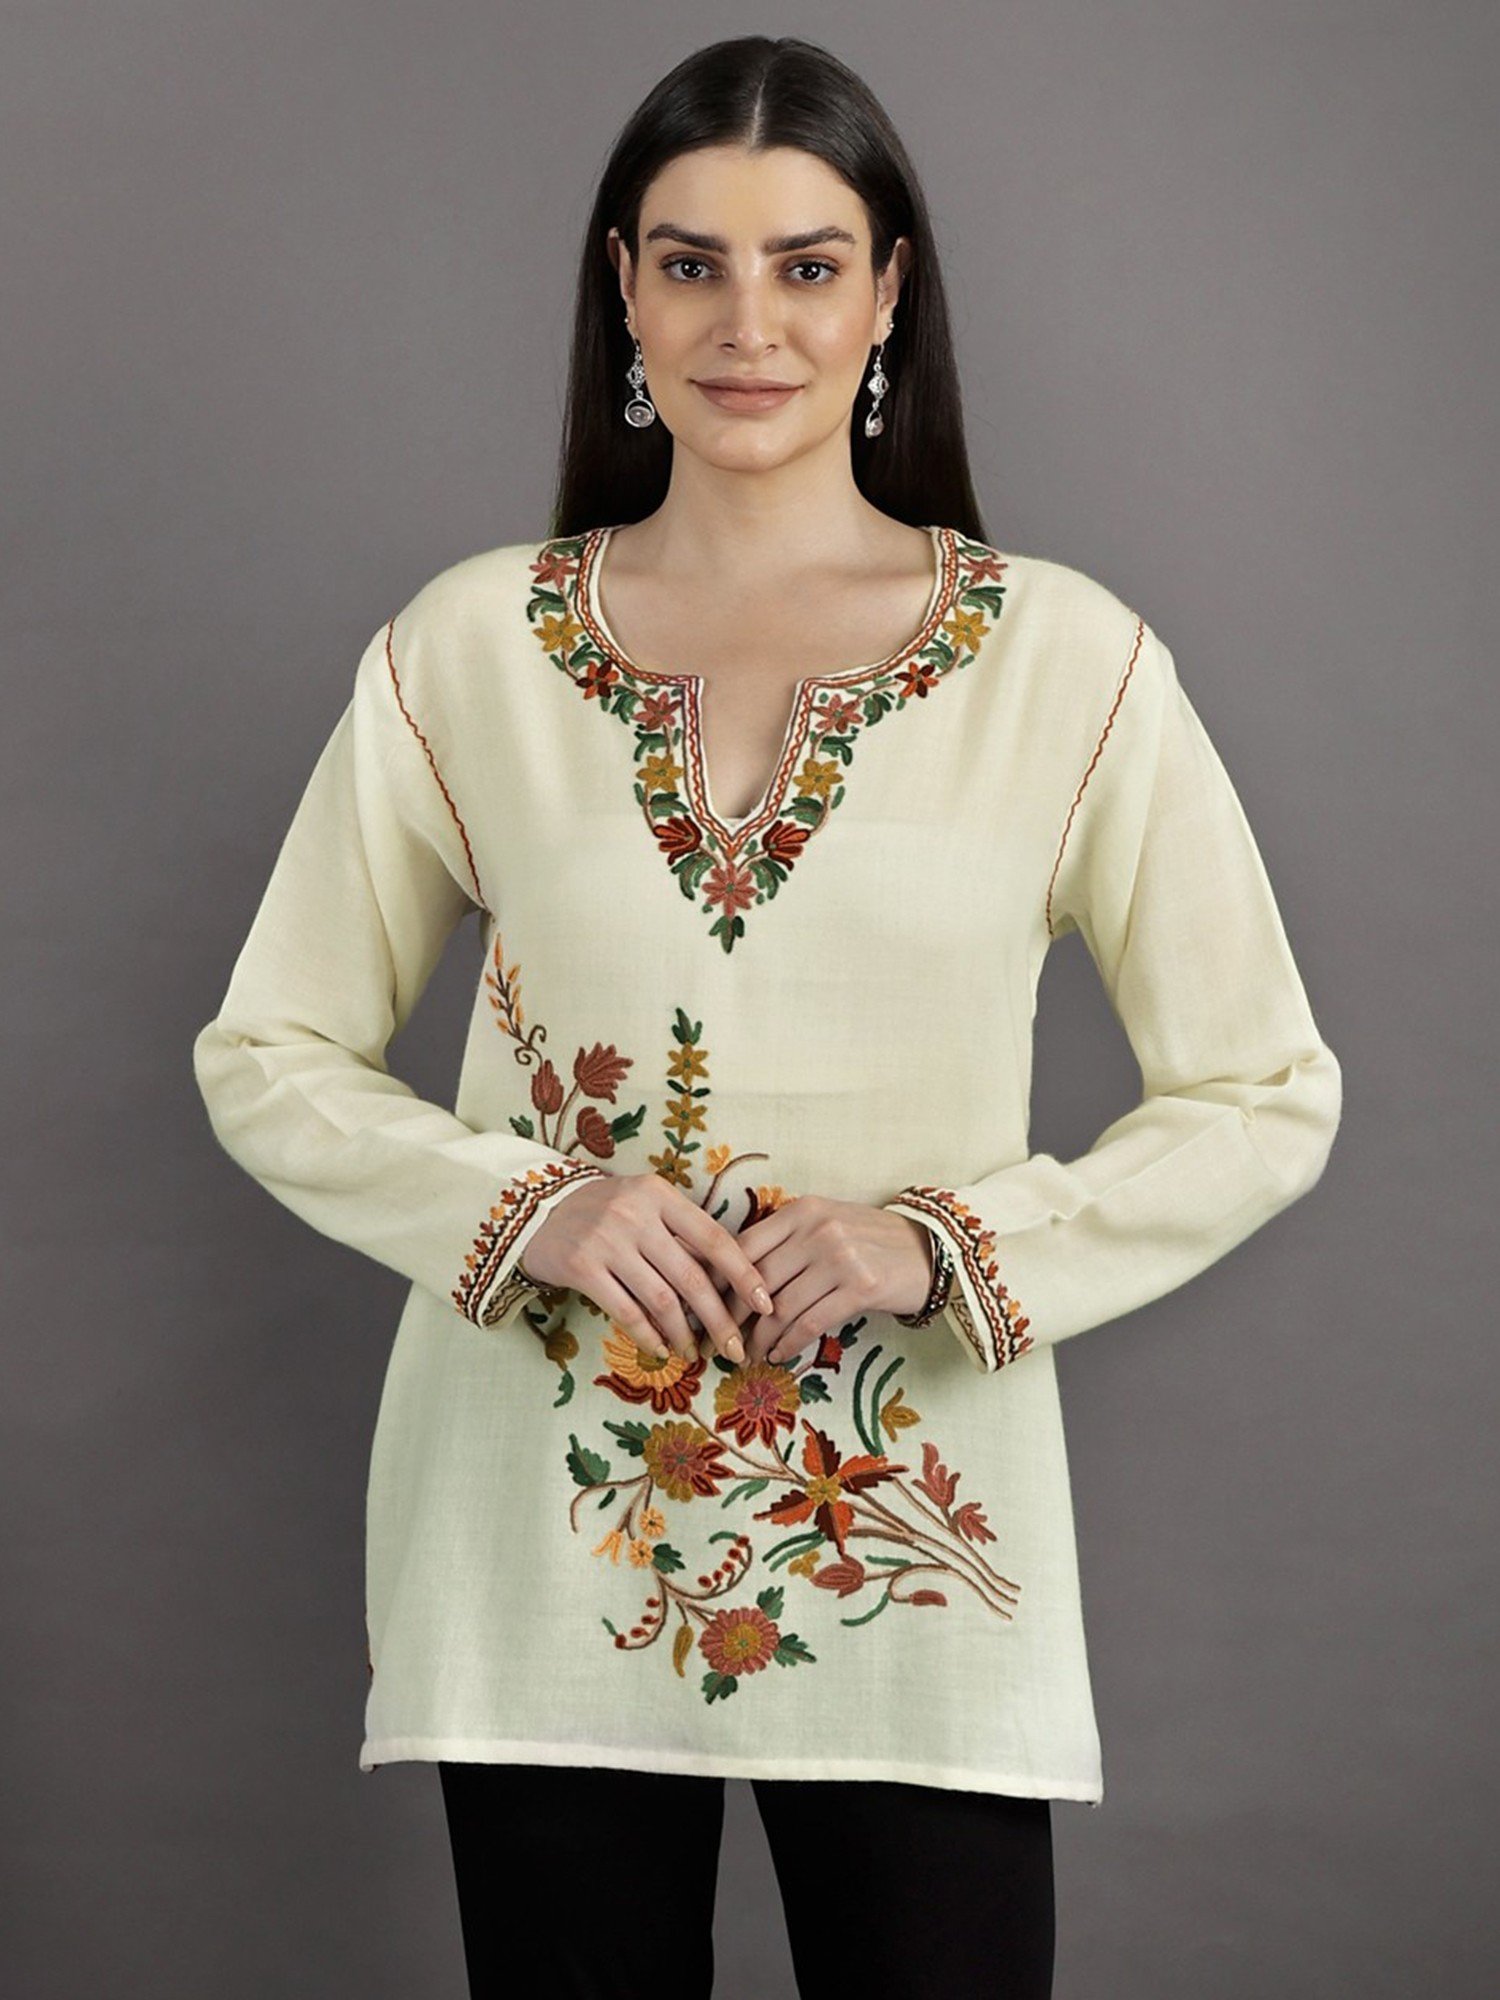 Short Kurti from Kashmir with Floral Aari-Embroidery by Hand | Exotic India  Art